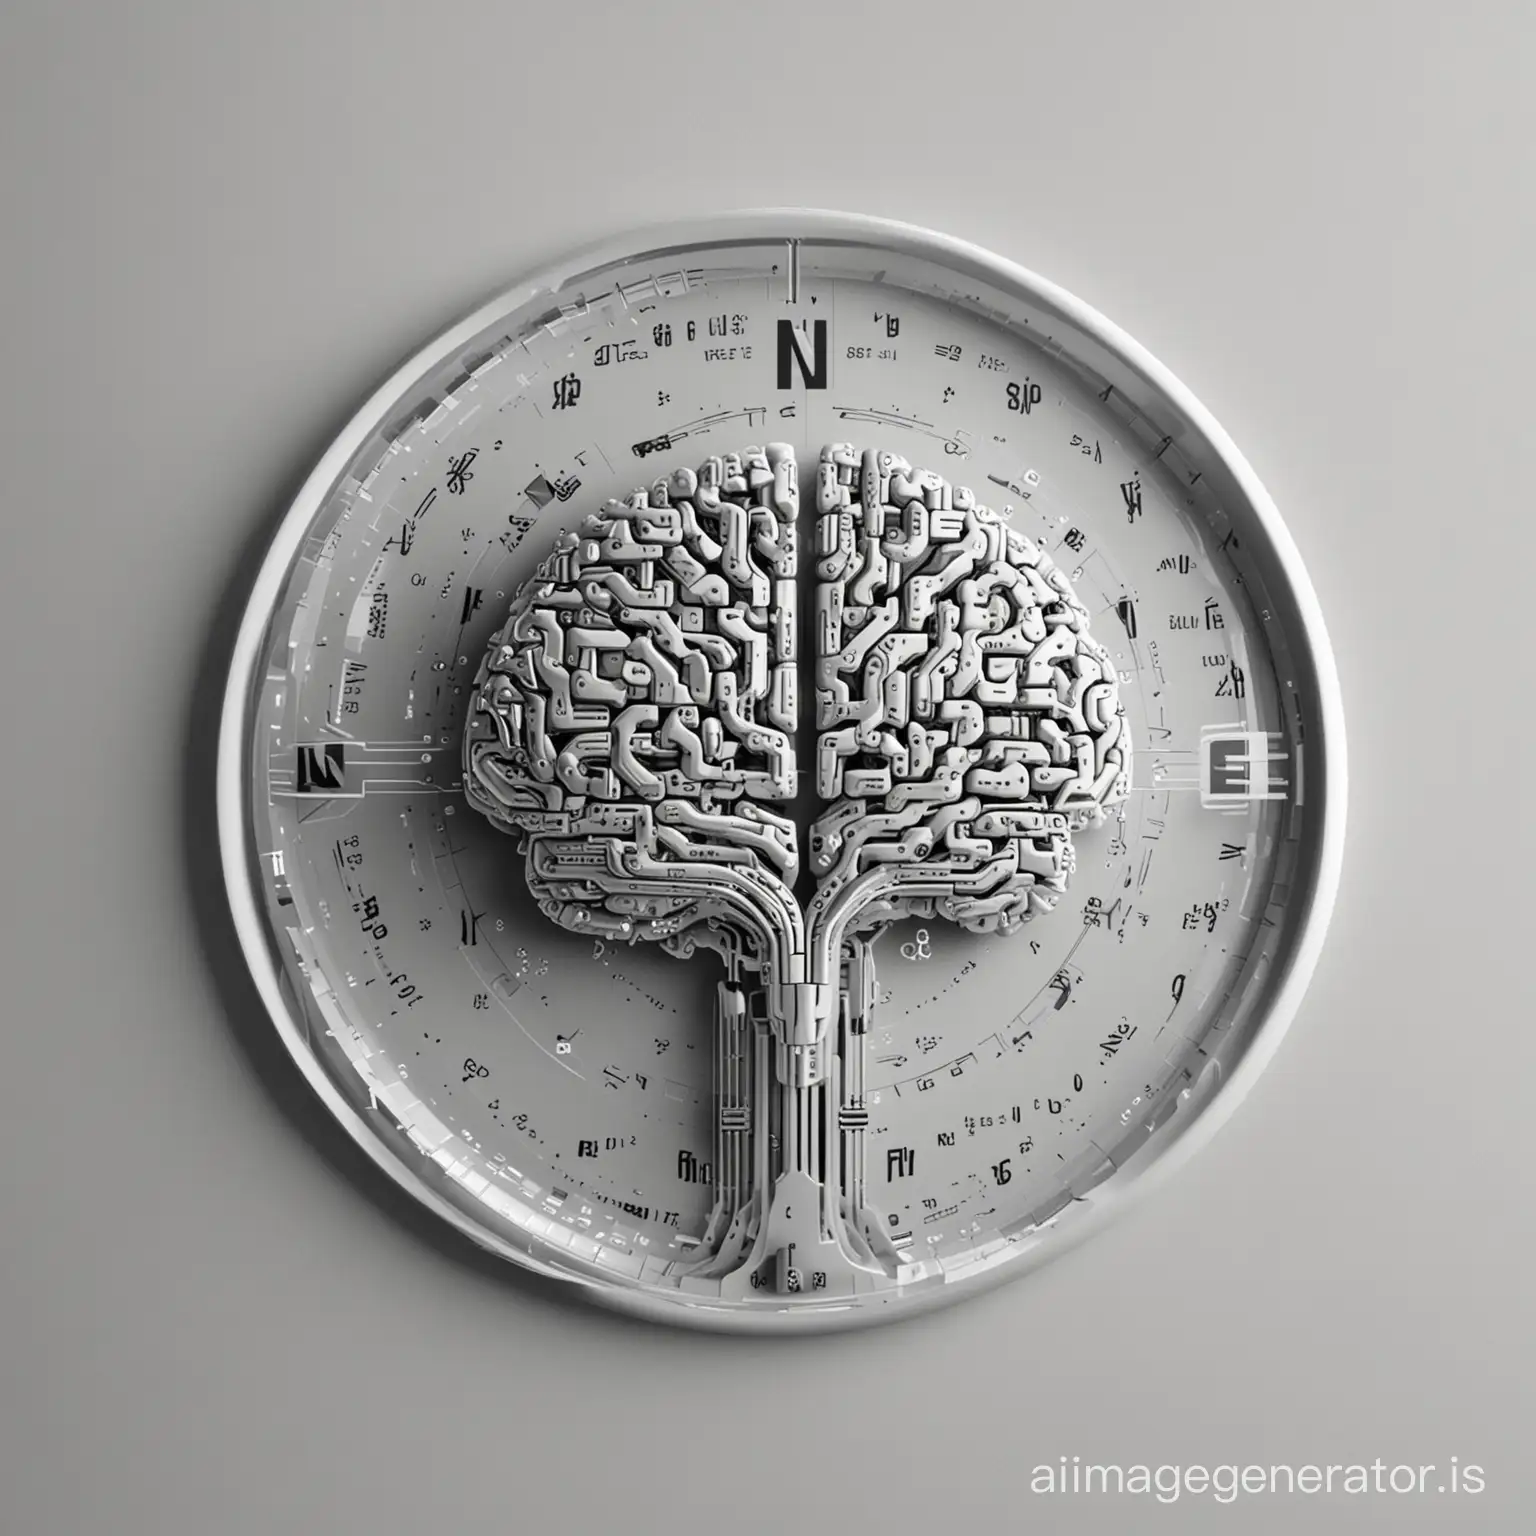 dalle:{
"prompt": "The logo for SynerGlide features a balanced scale in a minimalist style. On the left side of the scale, there is a detailed, organic representation of a human brain, full of textures that suggest creativity and emotion. On the right side, the scale balances with a geometric, digital representation of an AI brain, made of circuit-like patterns and clean lines. The scale symbolizes harmony and balance, representing the fusion of human intelligence with artificial intelligence. Beneath the scale, the word 'Synergy' is written in sleek, modern typography, symbolizing the combination of human and machine strengths to achieve greater outcomes. The overall design is futuristic yet elegant, conveying a sense of advanced technology and human collaboration.",
"size": "1024x1024"
}